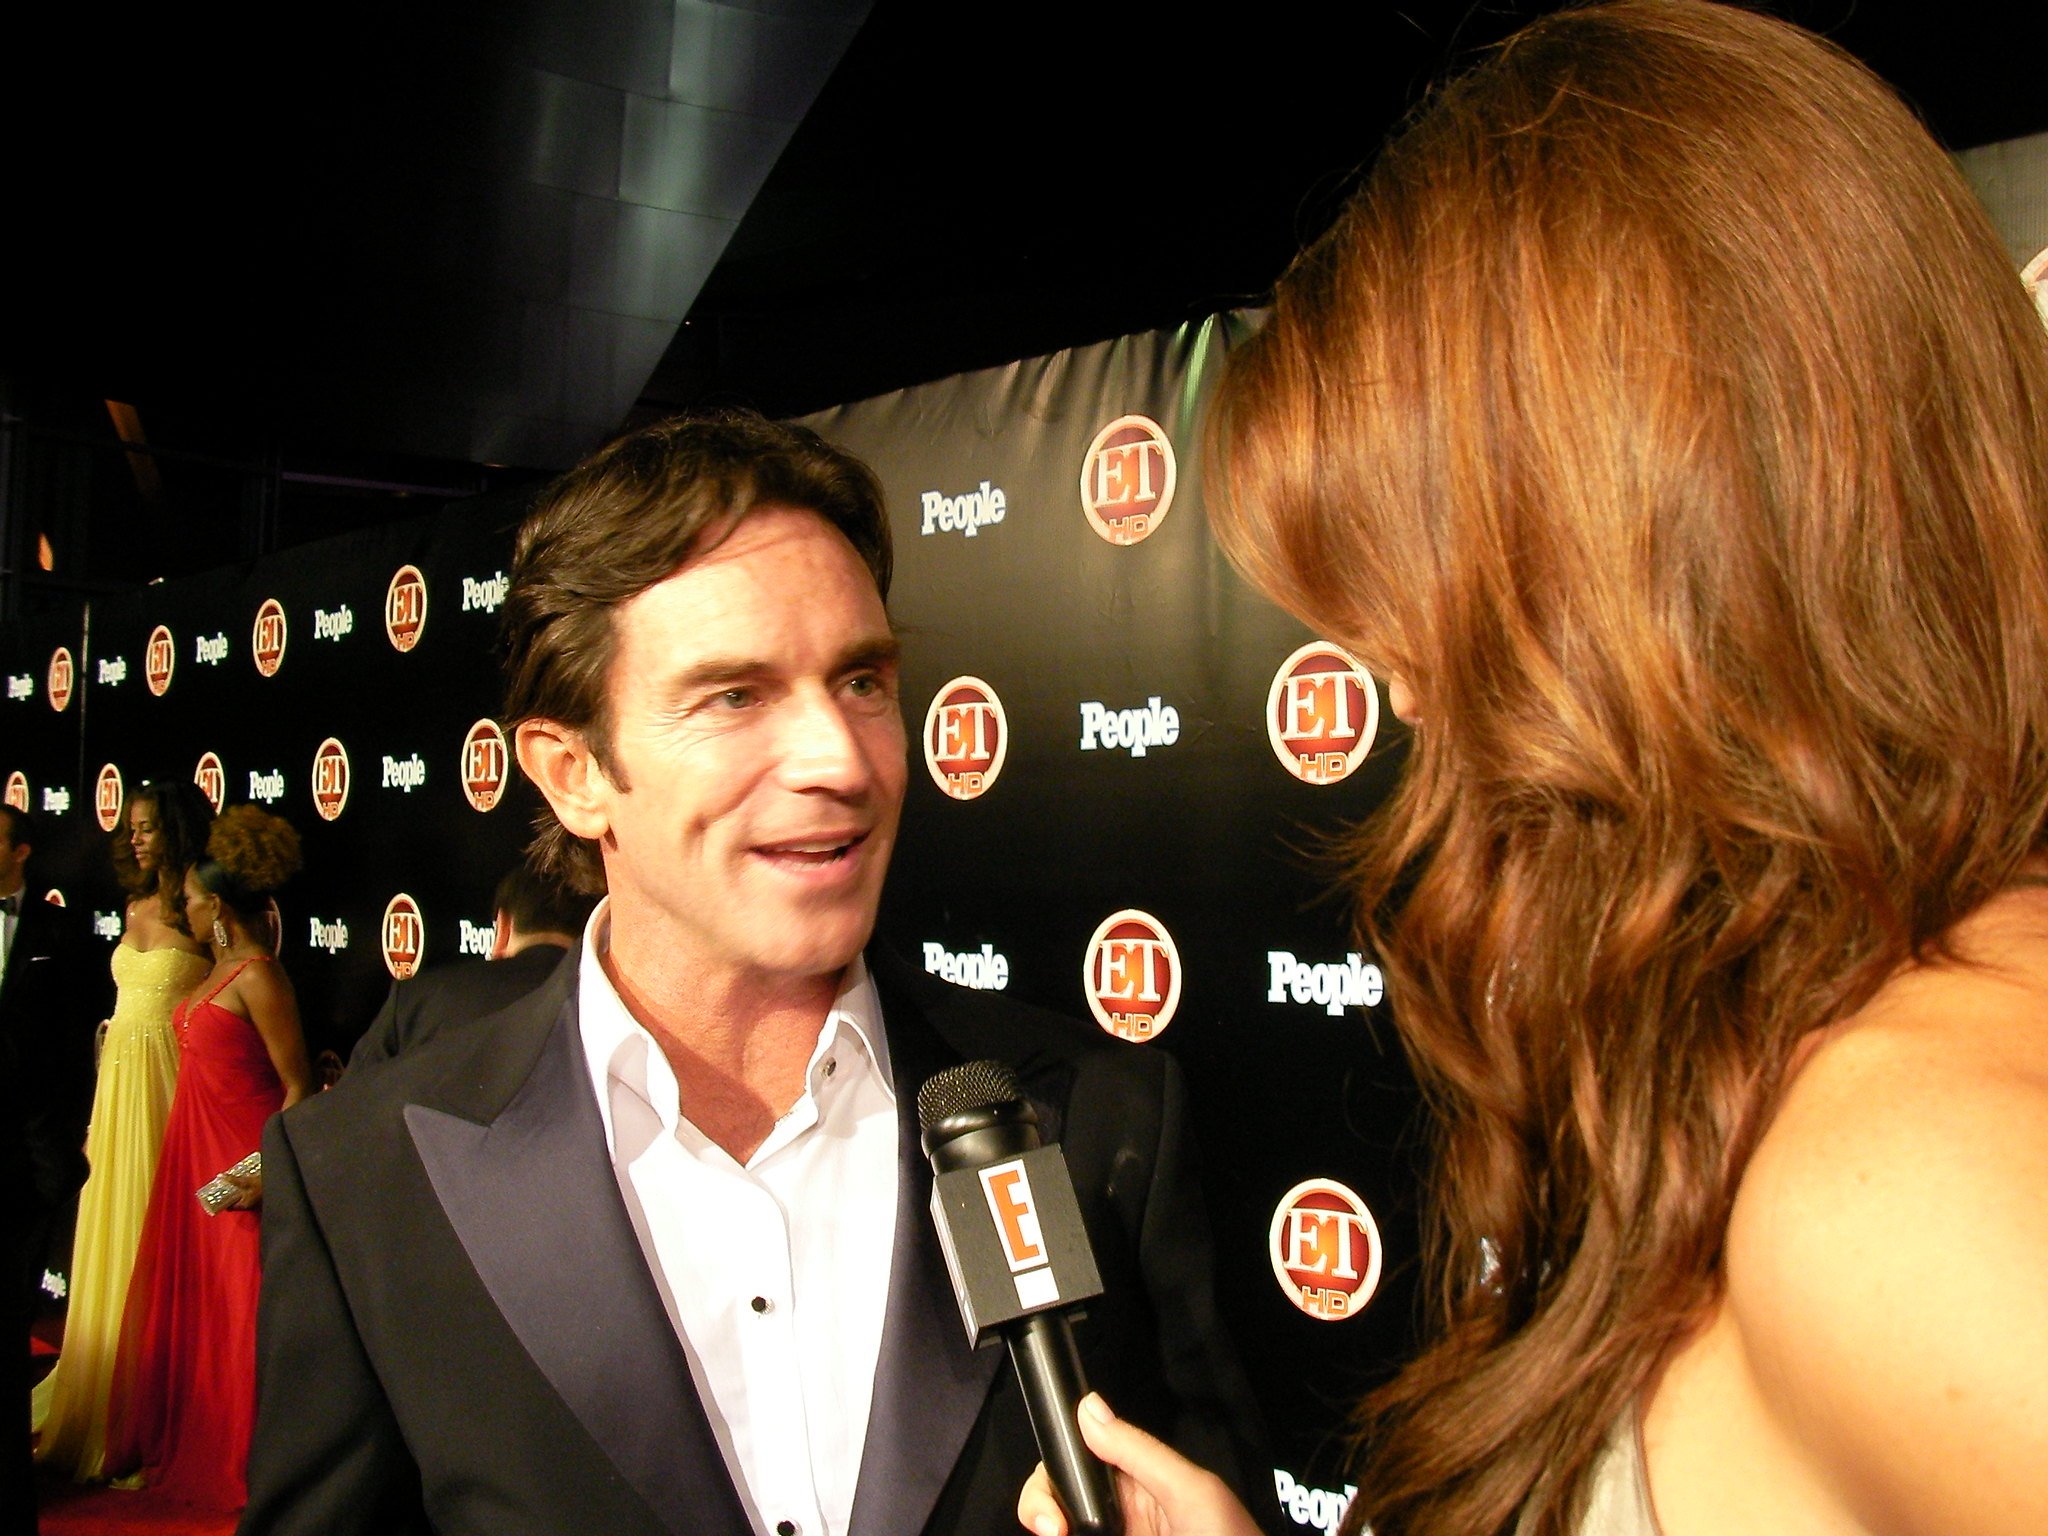 Jeff Probst at the Post-Emmys Party held at the Walt Disney Concert Hall on September 21, 2008 | Photo: Flickr/Kristin Dos Santos